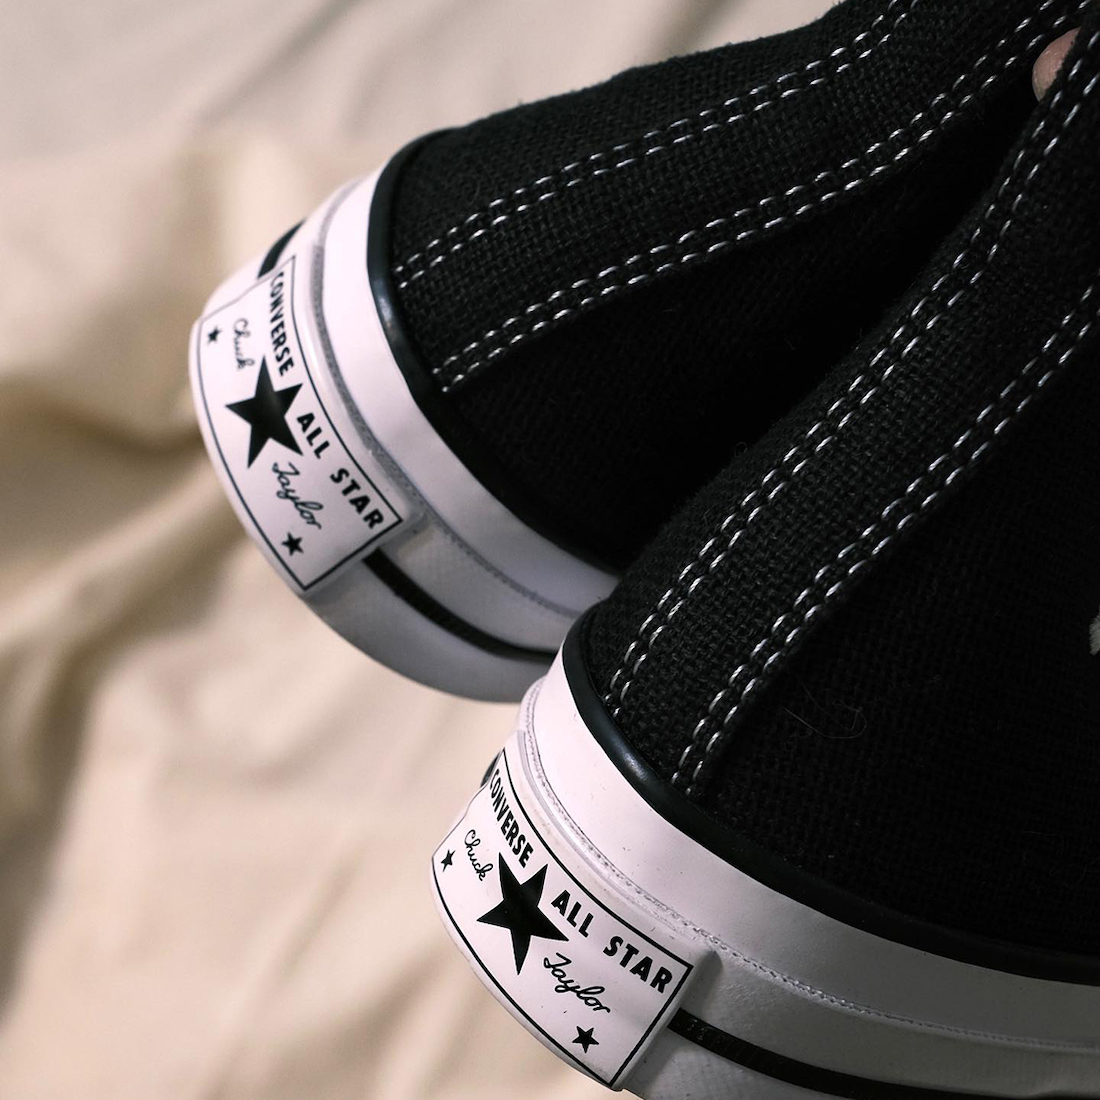 Stussy x Converse Chuck 70 + One Star 2022 Release Date | SBD